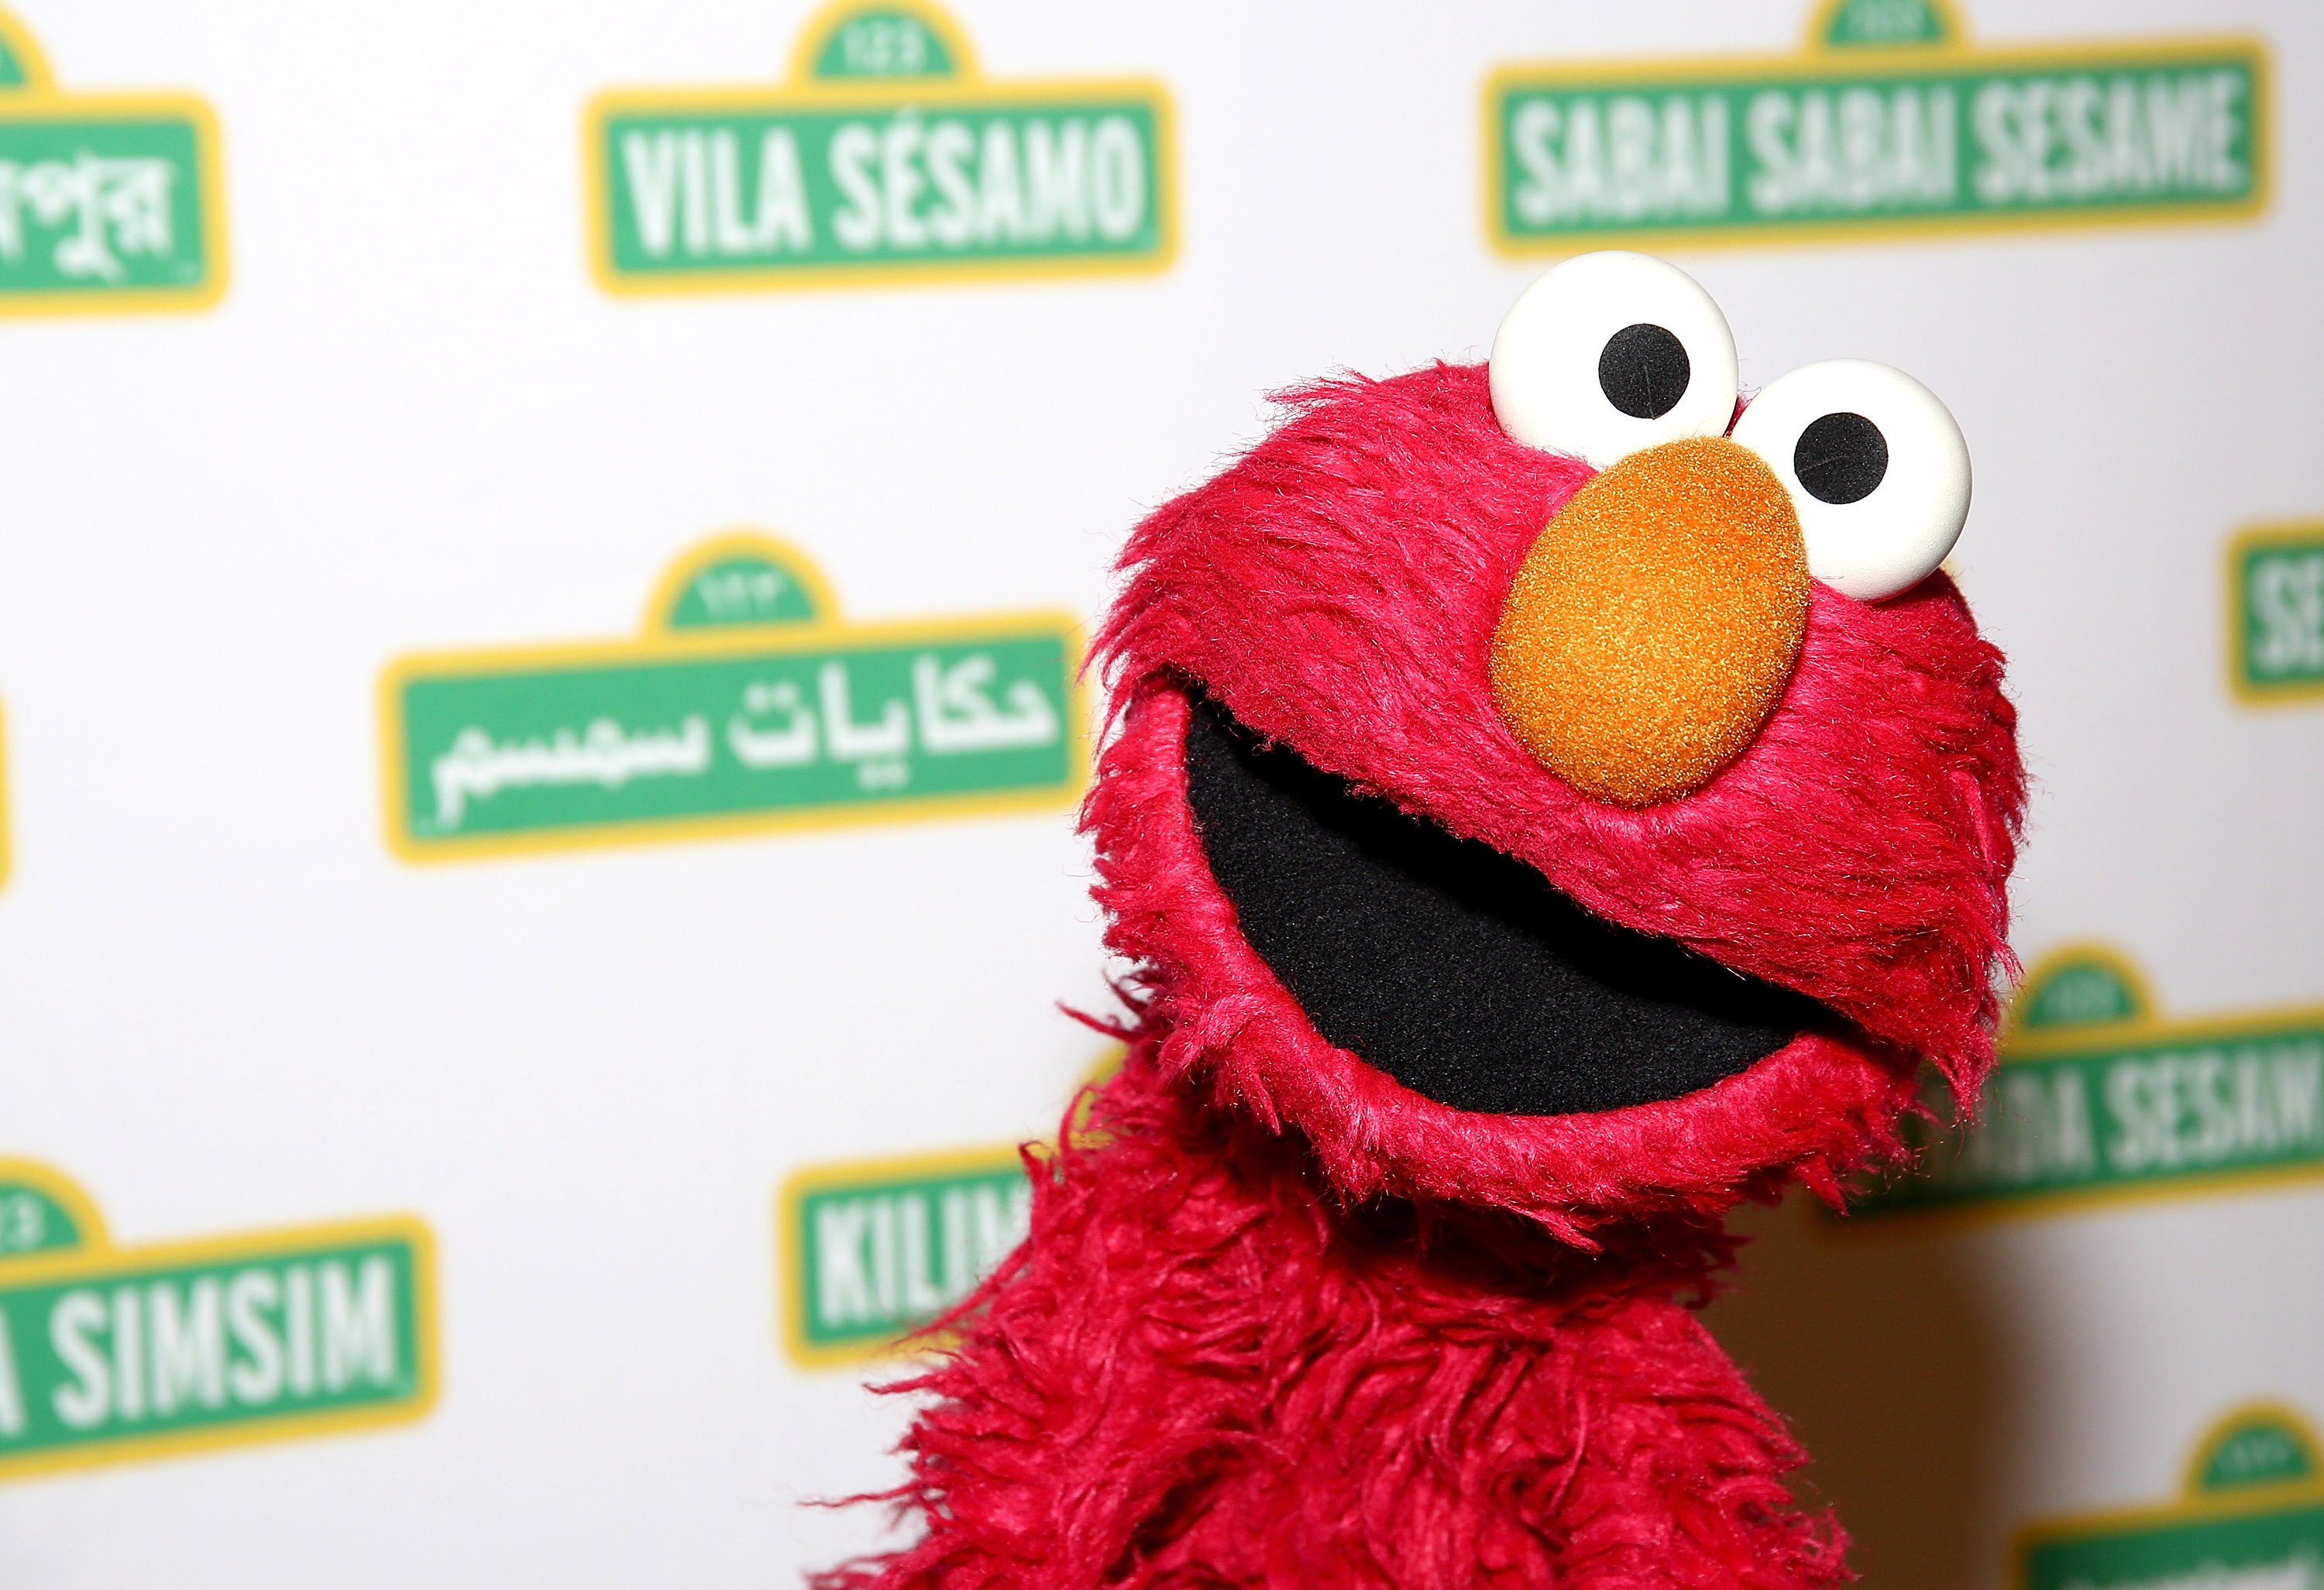 Elmo with 'Sesame Street' logos in the background